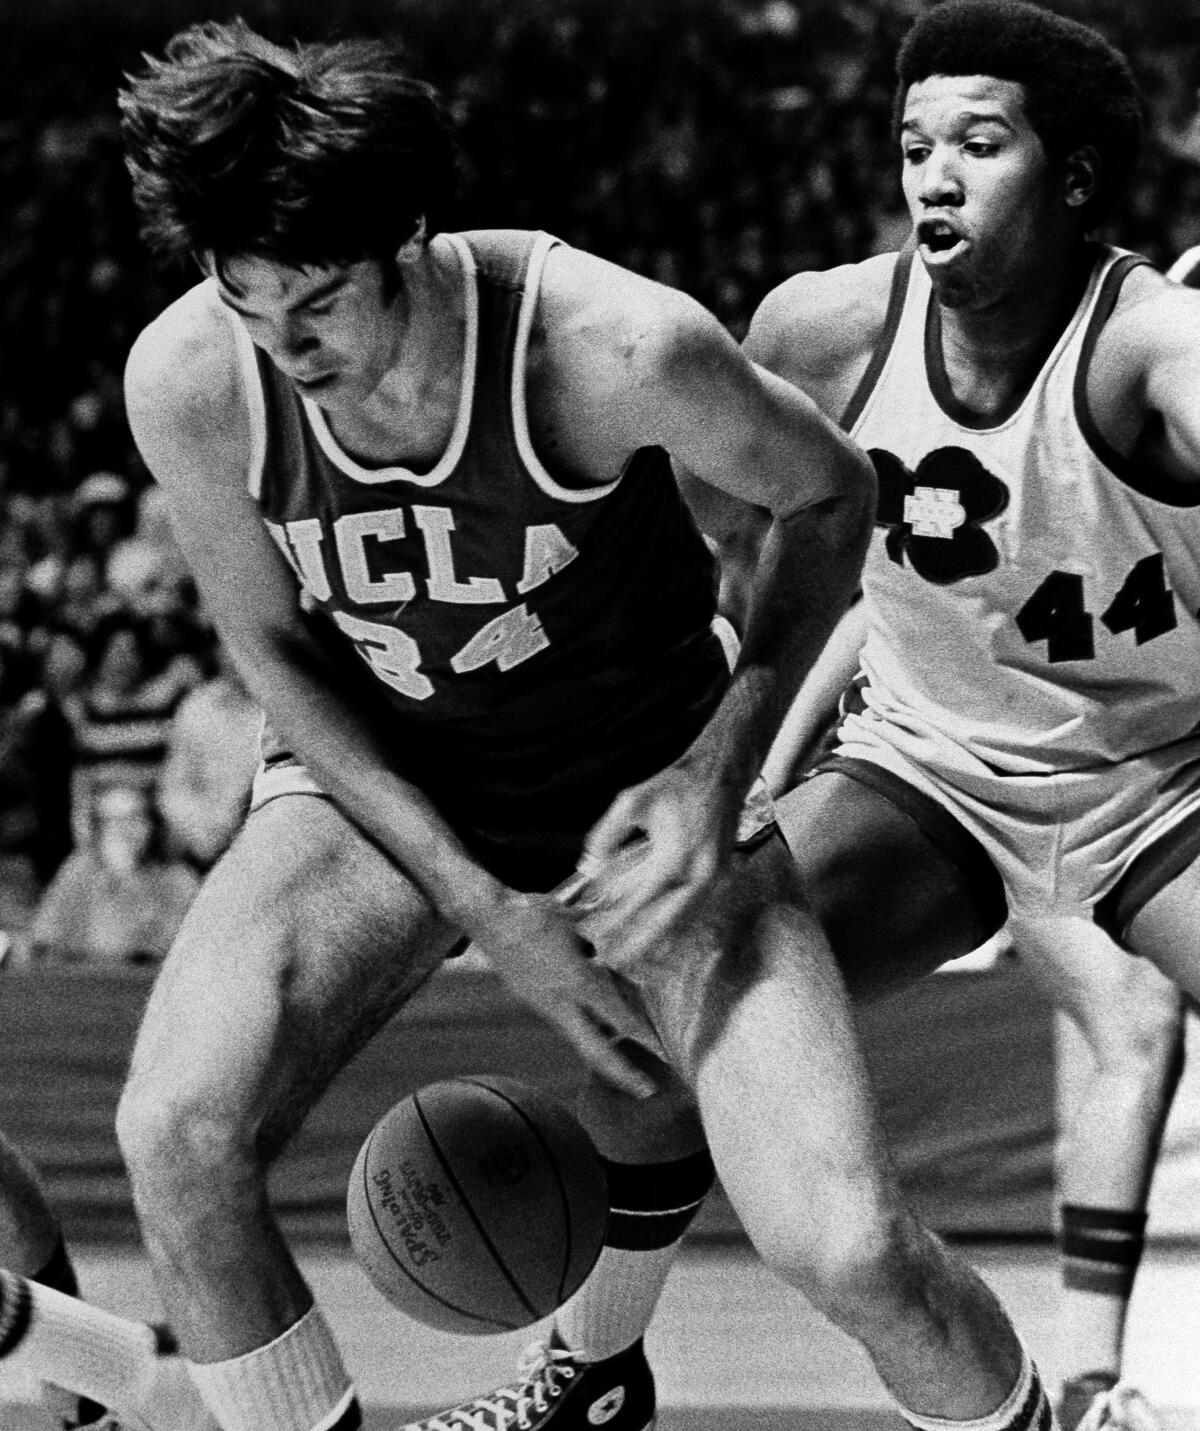 UCLA's Dave Meyers looks for the ball after losing it against Notre Dame's Adrian Dantley in January 1974 in South Bend, Ind.